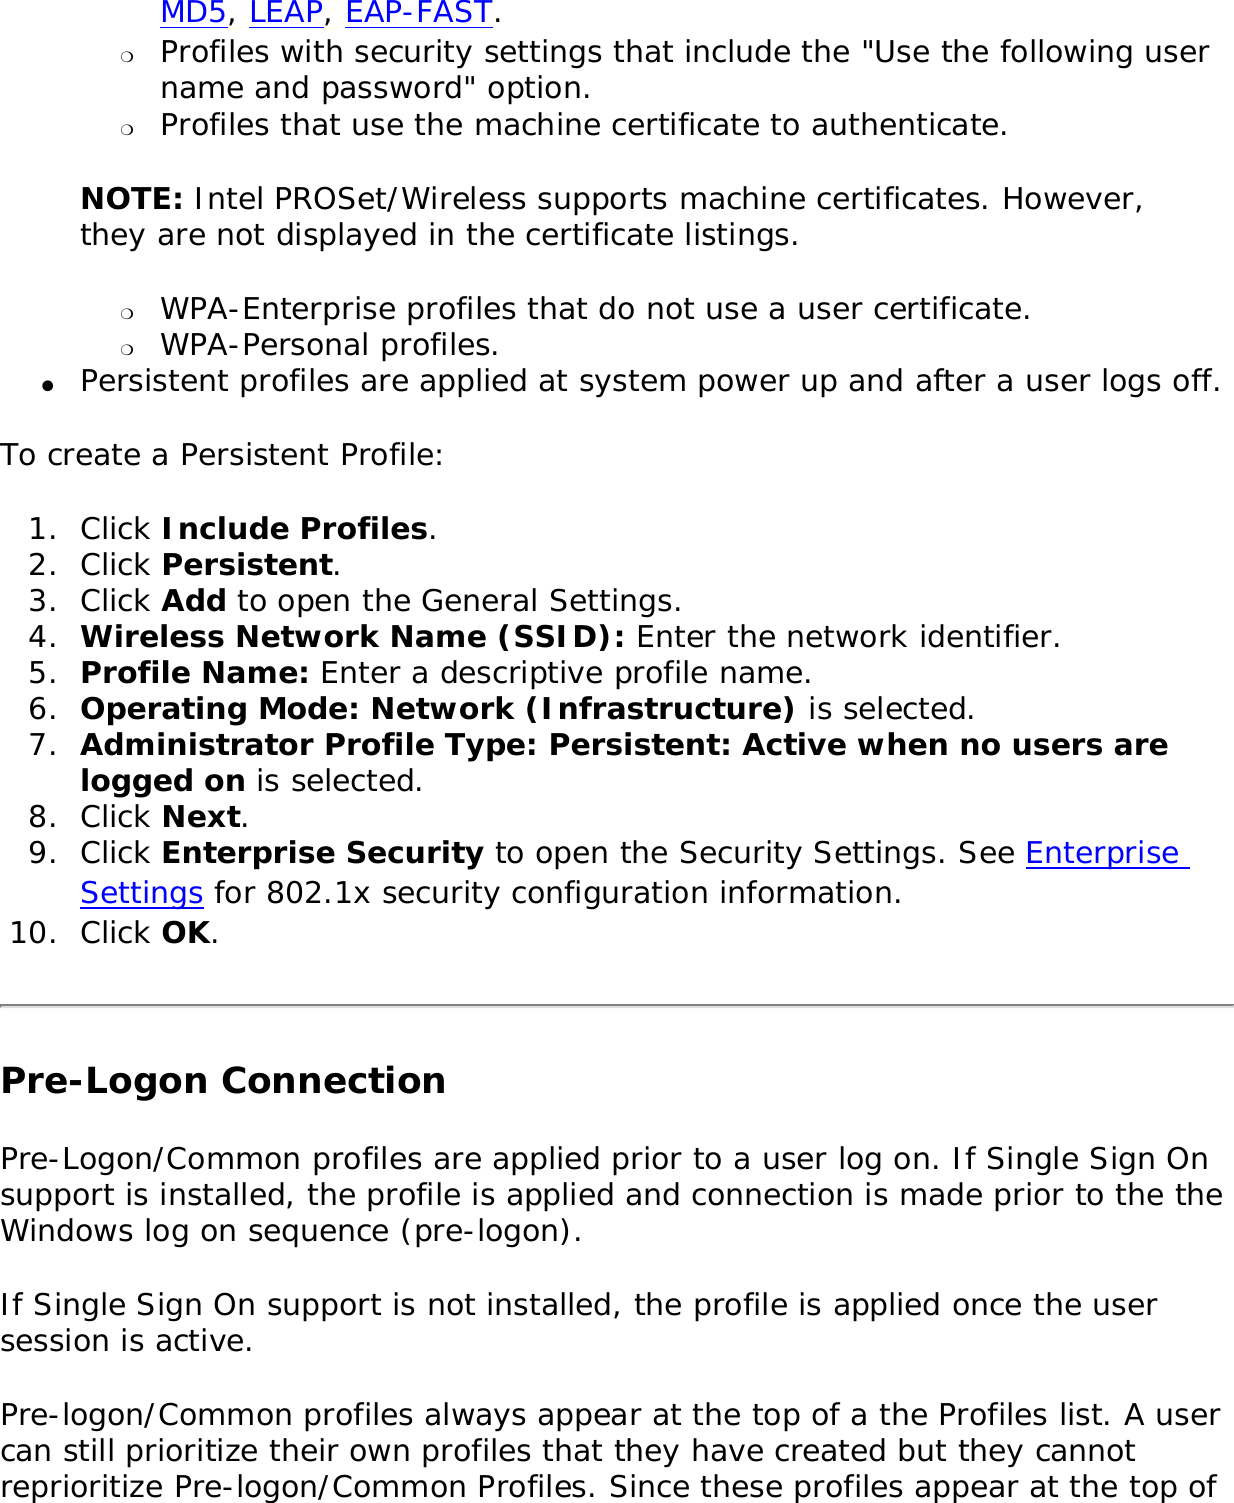 MD5, LEAP, EAP-FAST. ❍     Profiles with security settings that include the &quot;Use the following user name and password&quot; option.❍     Profiles that use the machine certificate to authenticate. NOTE: Intel PROSet/Wireless supports machine certificates. However, they are not displayed in the certificate listings. ❍     WPA-Enterprise profiles that do not use a user certificate.❍     WPA-Personal profiles.●     Persistent profiles are applied at system power up and after a user logs off.To create a Persistent Profile: 1.  Click Include Profiles.2.  Click Persistent.3.  Click Add to open the General Settings. 4.  Wireless Network Name (SSID): Enter the network identifier. 5.  Profile Name: Enter a descriptive profile name.6.  Operating Mode: Network (Infrastructure) is selected. 7.  Administrator Profile Type: Persistent: Active when no users are logged on is selected. 8.  Click Next. 9.  Click Enterprise Security to open the Security Settings. See Enterprise Settings for 802.1x security configuration information. 10.  Click OK. Pre-Logon Connection Pre-Logon/Common profiles are applied prior to a user log on. If Single Sign On support is installed, the profile is applied and connection is made prior to the the Windows log on sequence (pre-logon). If Single Sign On support is not installed, the profile is applied once the user session is active. Pre-logon/Common profiles always appear at the top of a the Profiles list. A user can still prioritize their own profiles that they have created but they cannot reprioritize Pre-logon/Common Profiles. Since these profiles appear at the top of 